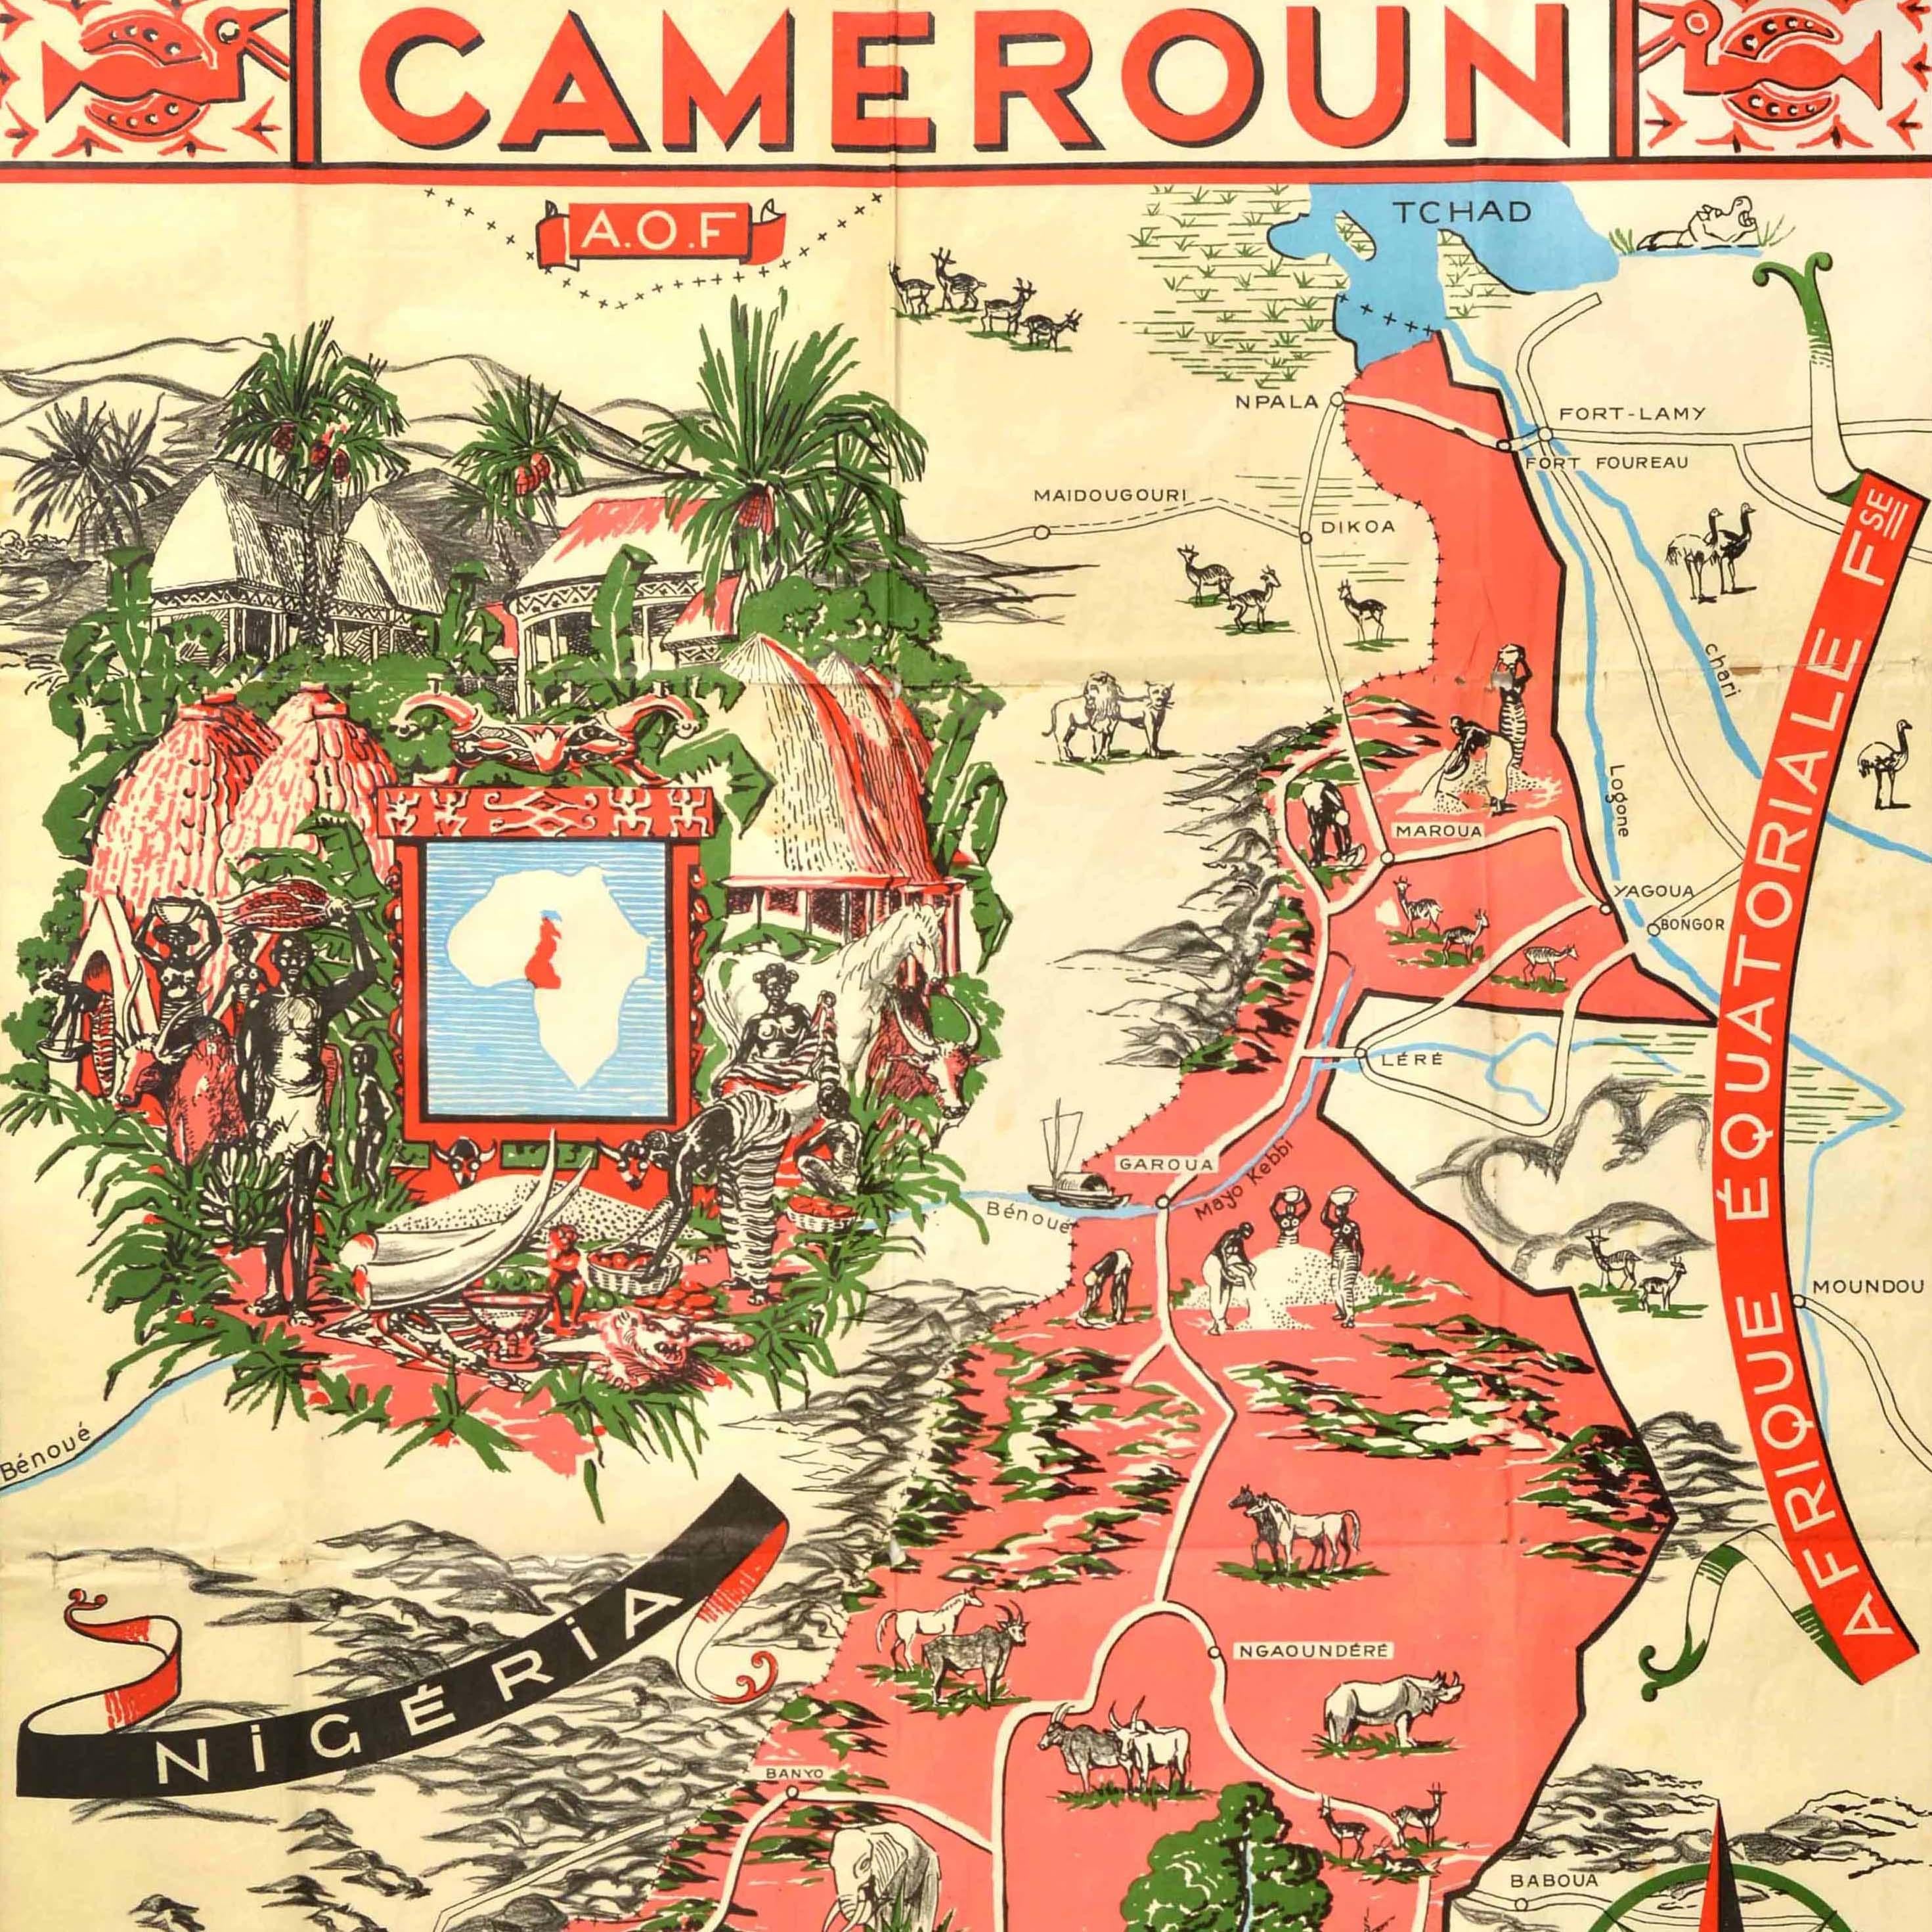 Original vintage illustrated map poster for Cameroun AOF Afrique Occidentale Francaise / Cameroon French West Africa showing the Central African country of Cameroon in pink and green on the Gulf of Guinea bordered by Nigeria, Chad, Guinea and Gabon